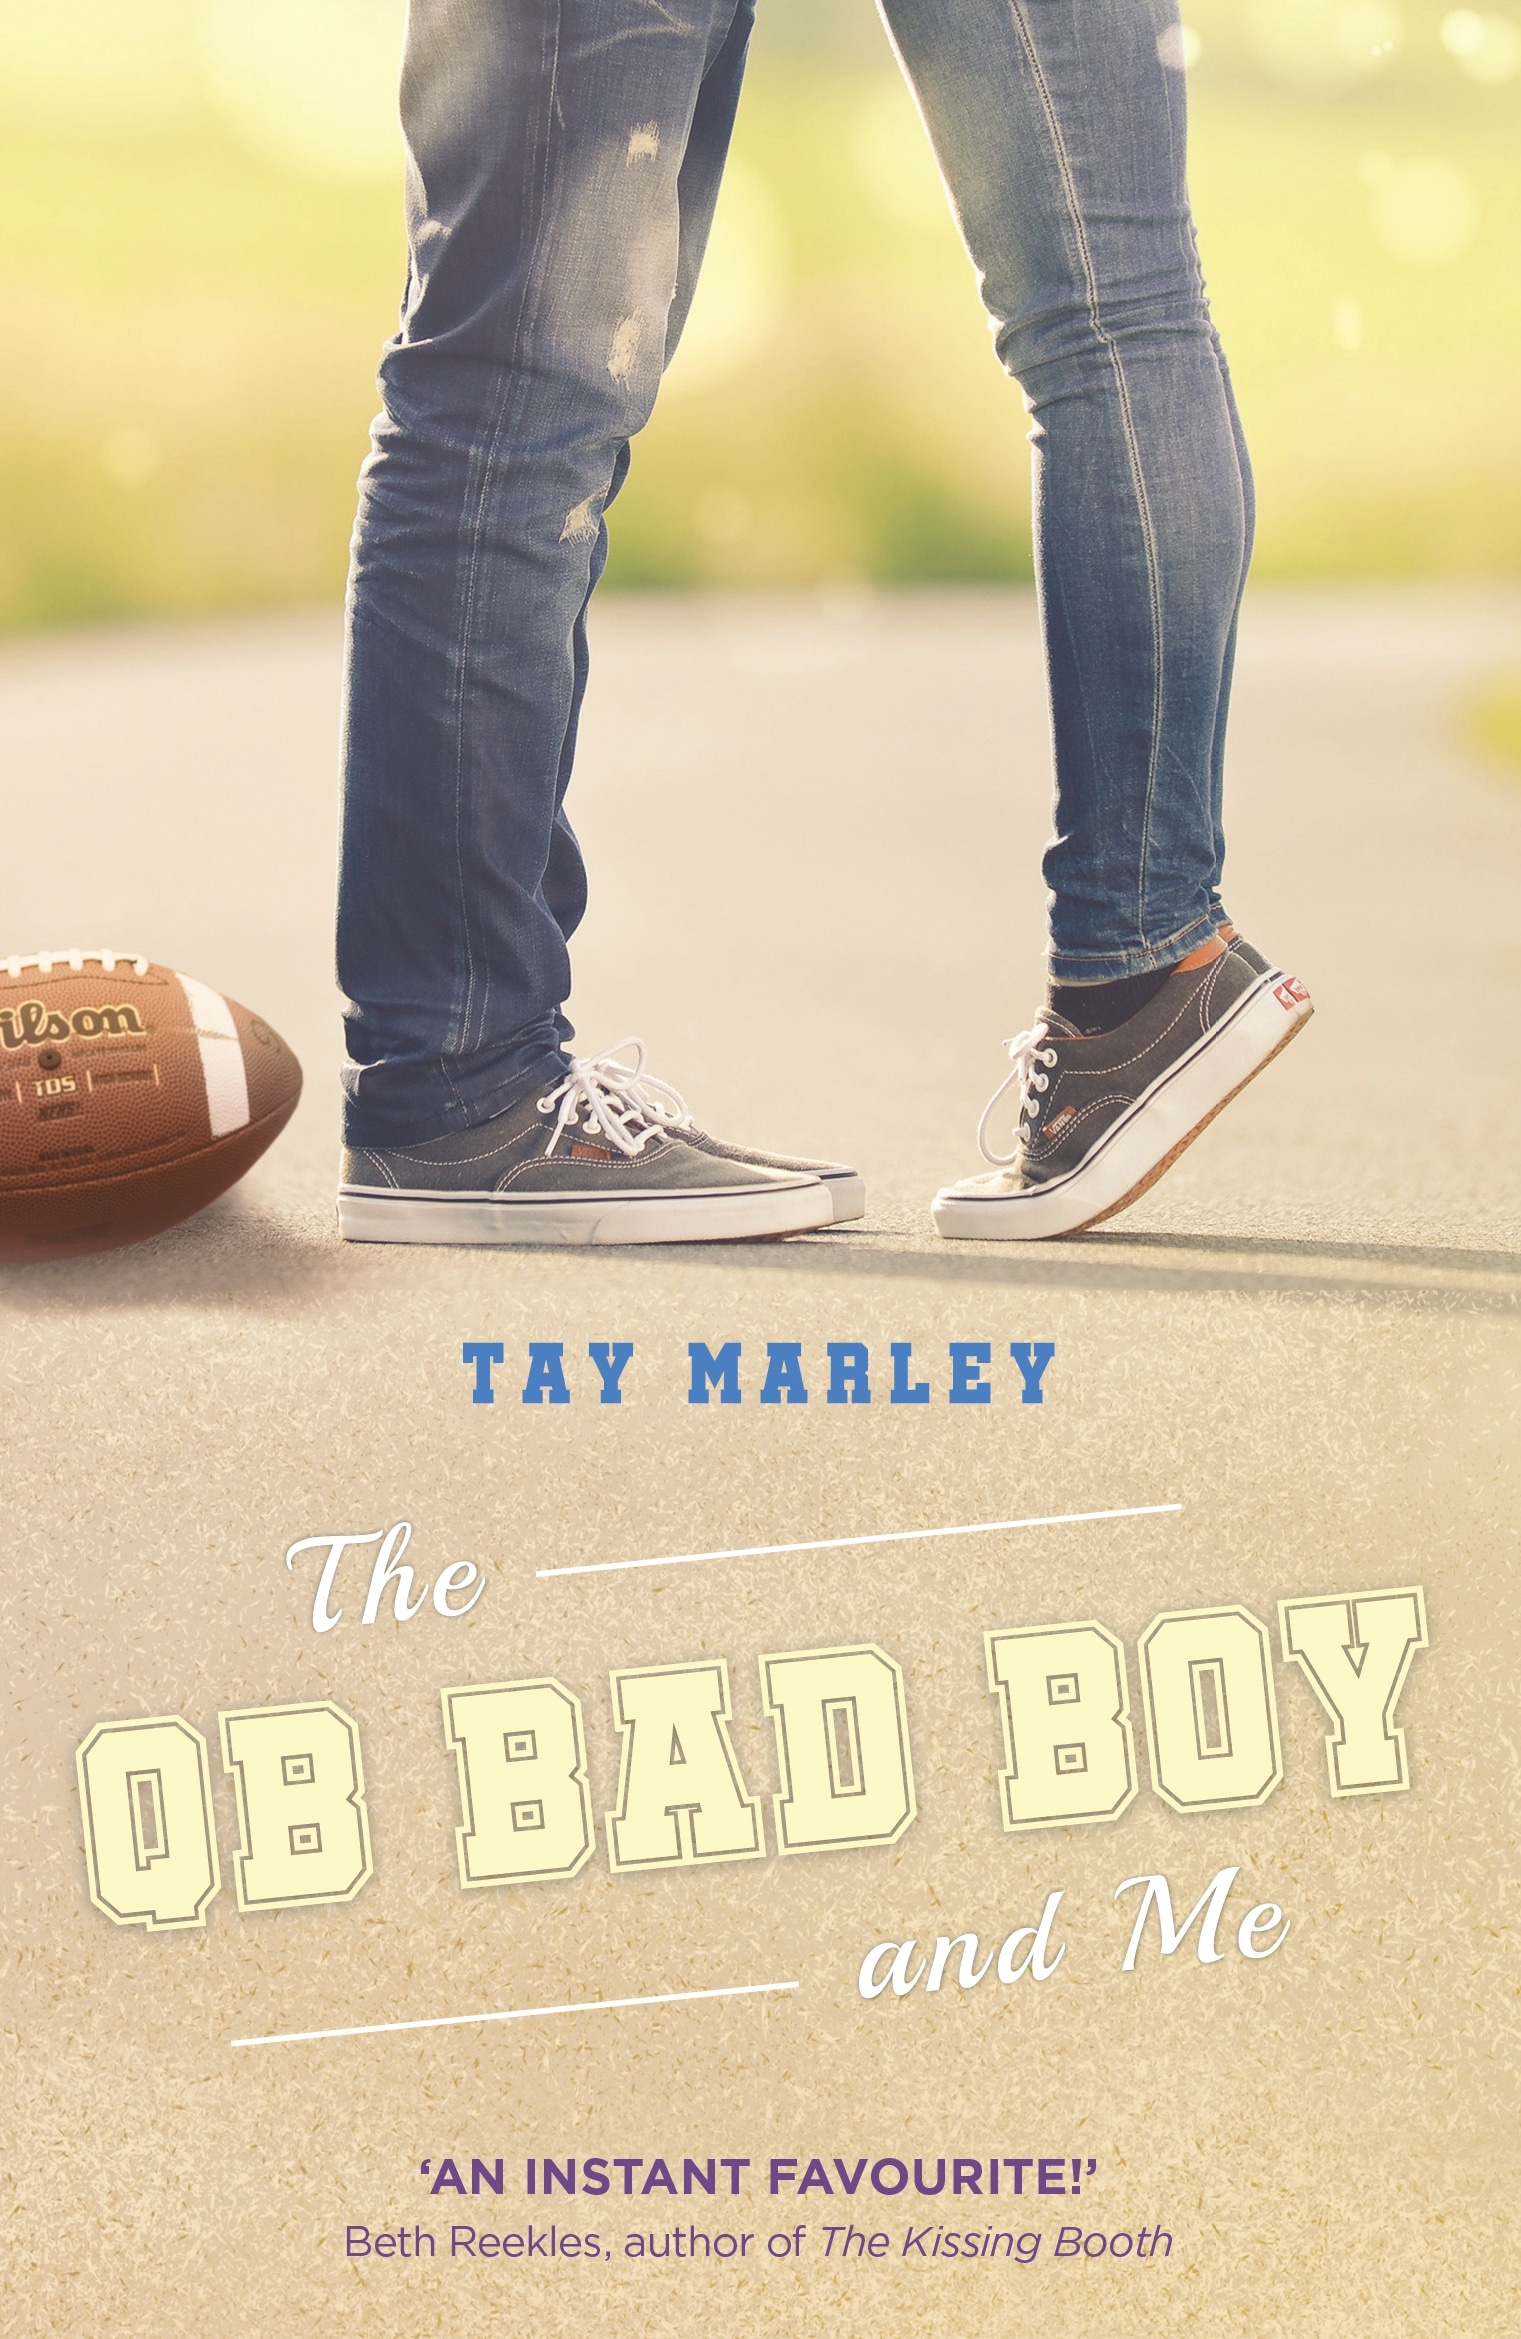 Book “The QB Bad Boy and Me” by Tay Marley — September 19, 2019